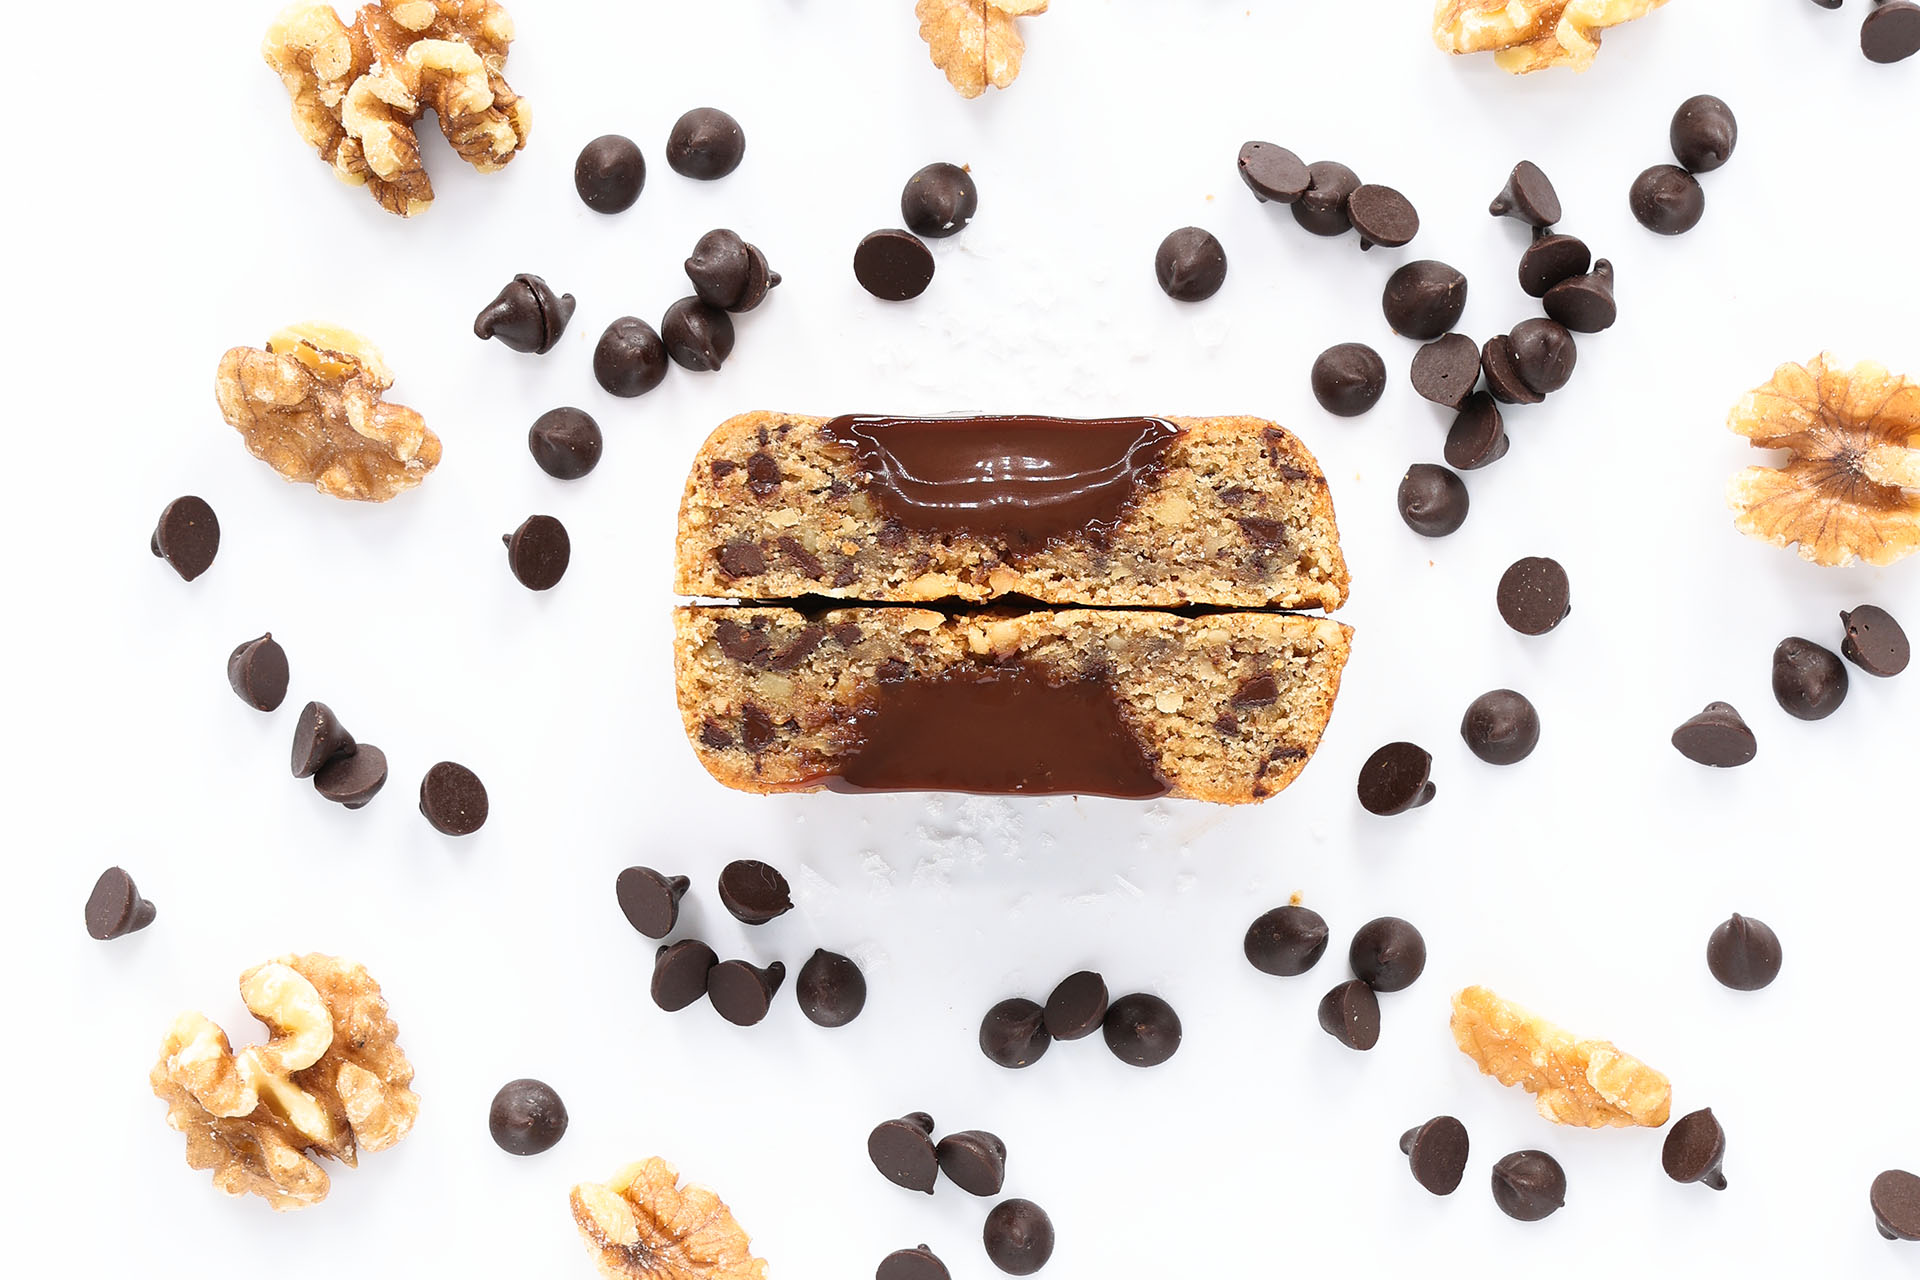 Chocolate-drizzled blondie surrounded by walnuts and chocolate chips on a white surface, with a hint of espresso.